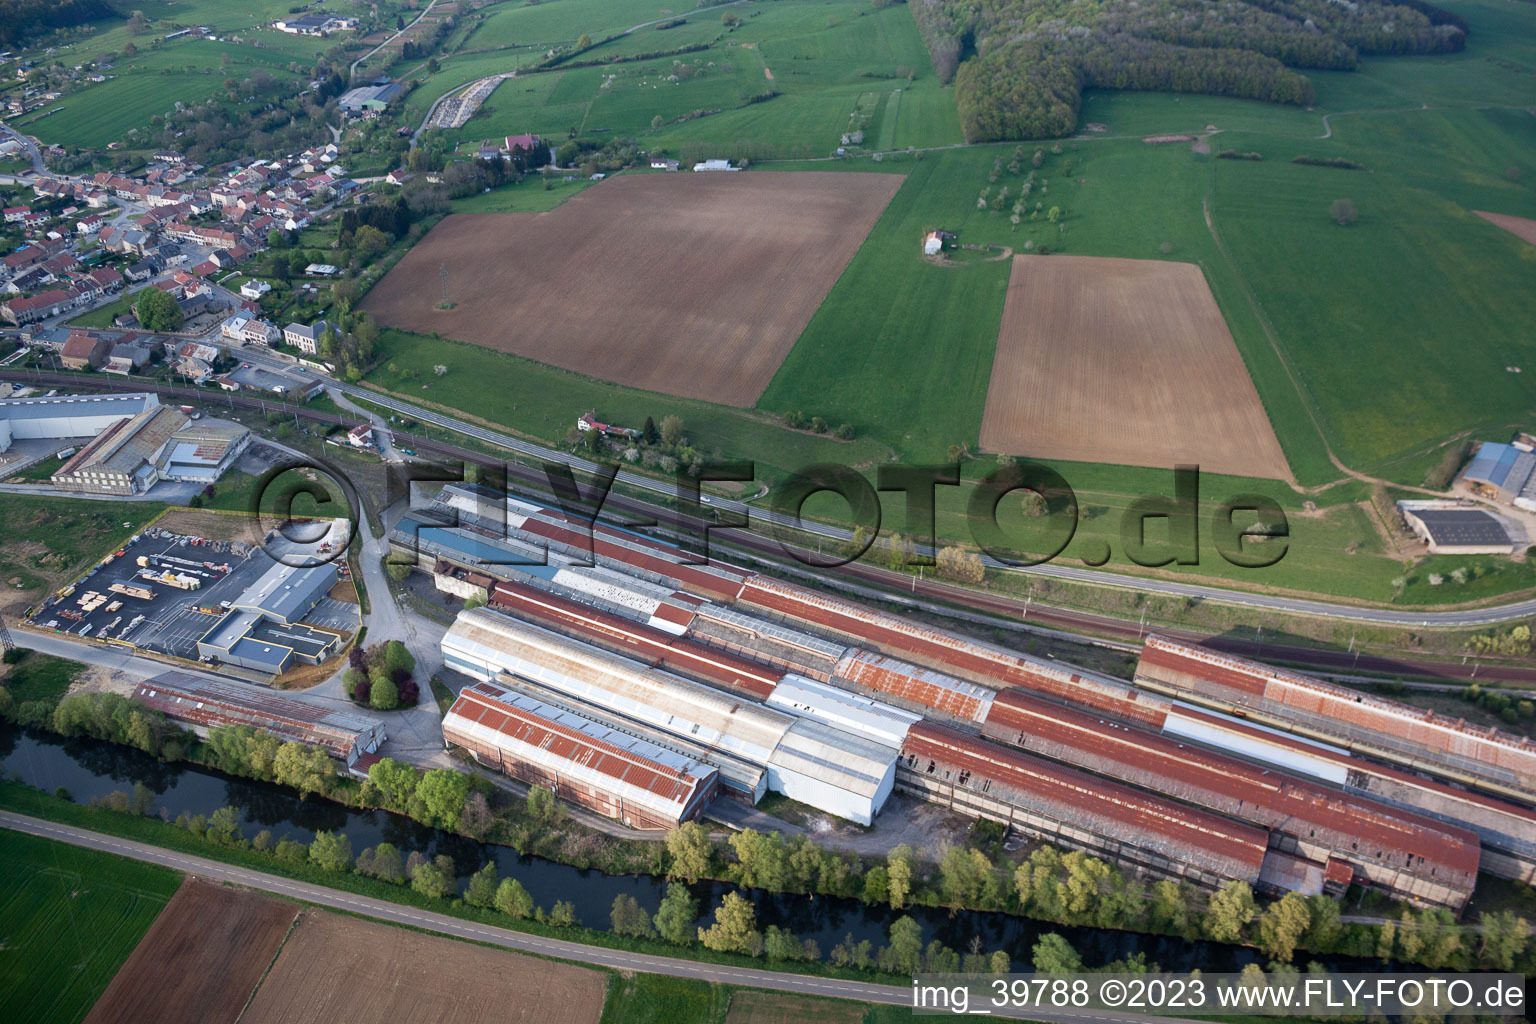 Aerial view of Railway depot and repair shop for maintenance and repair of trains in Blagny in Alsace-Champagne-Ardenne-Lorraine, France